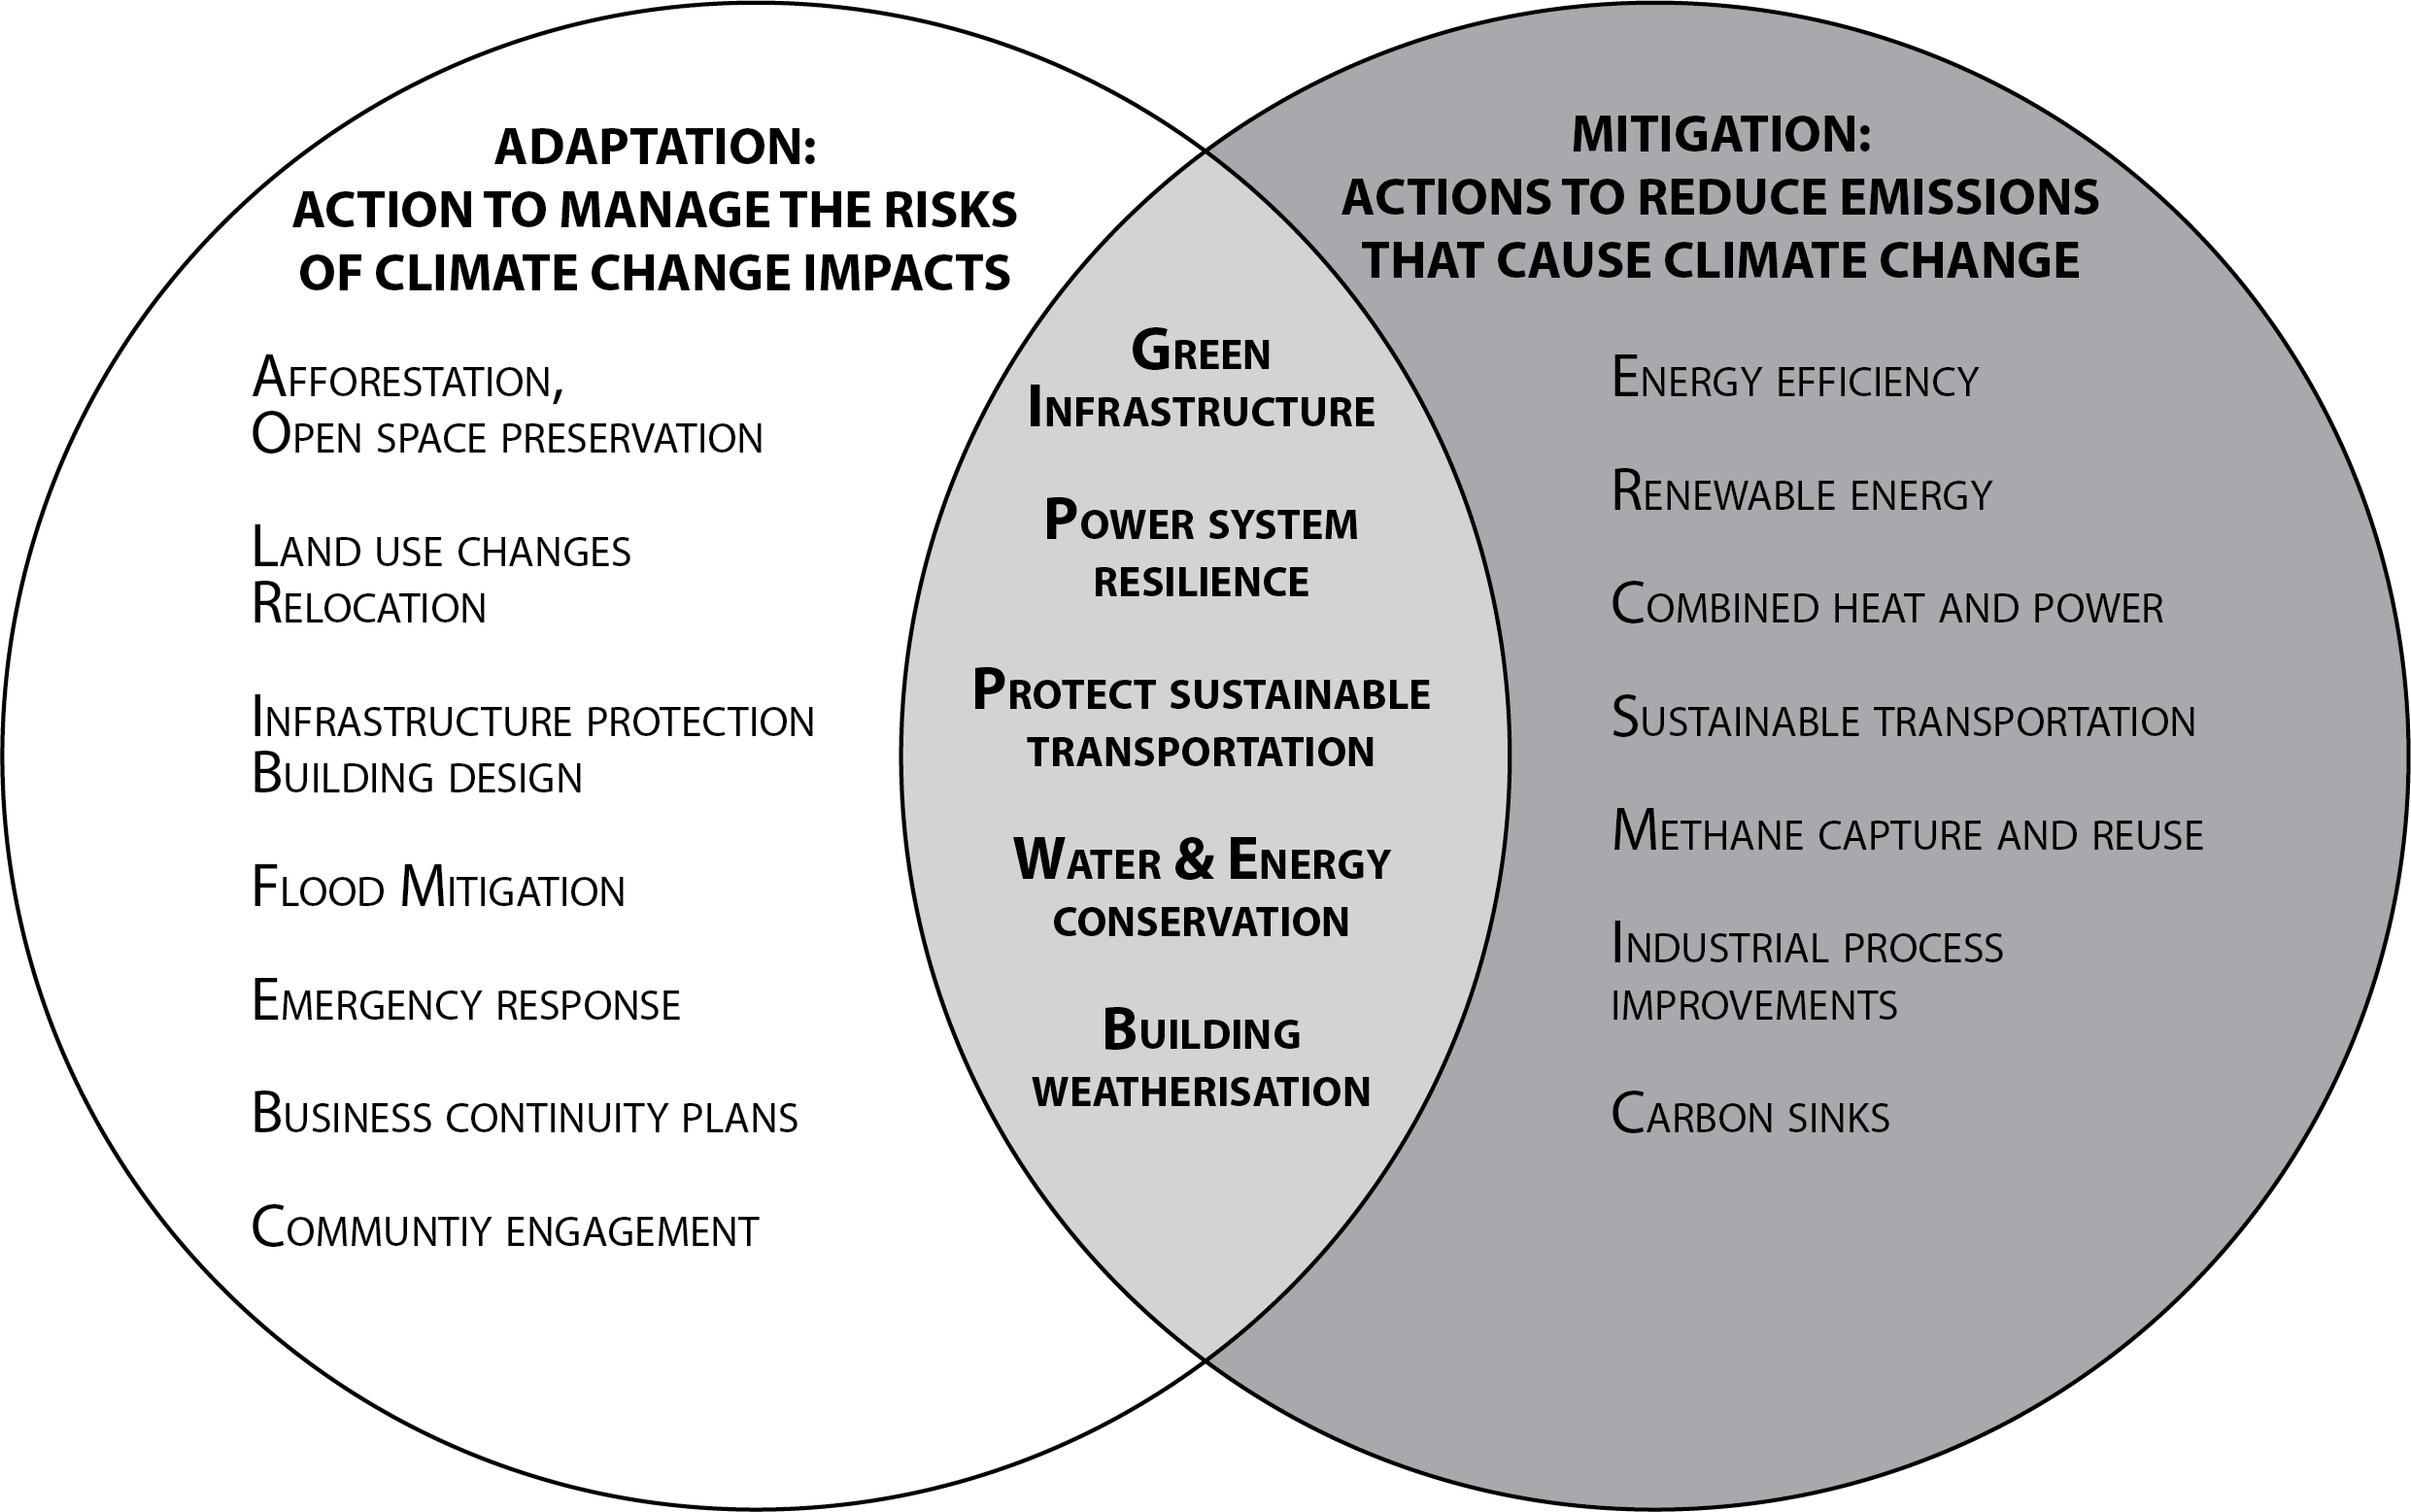 Co-benefits adaptation and mitigation actions